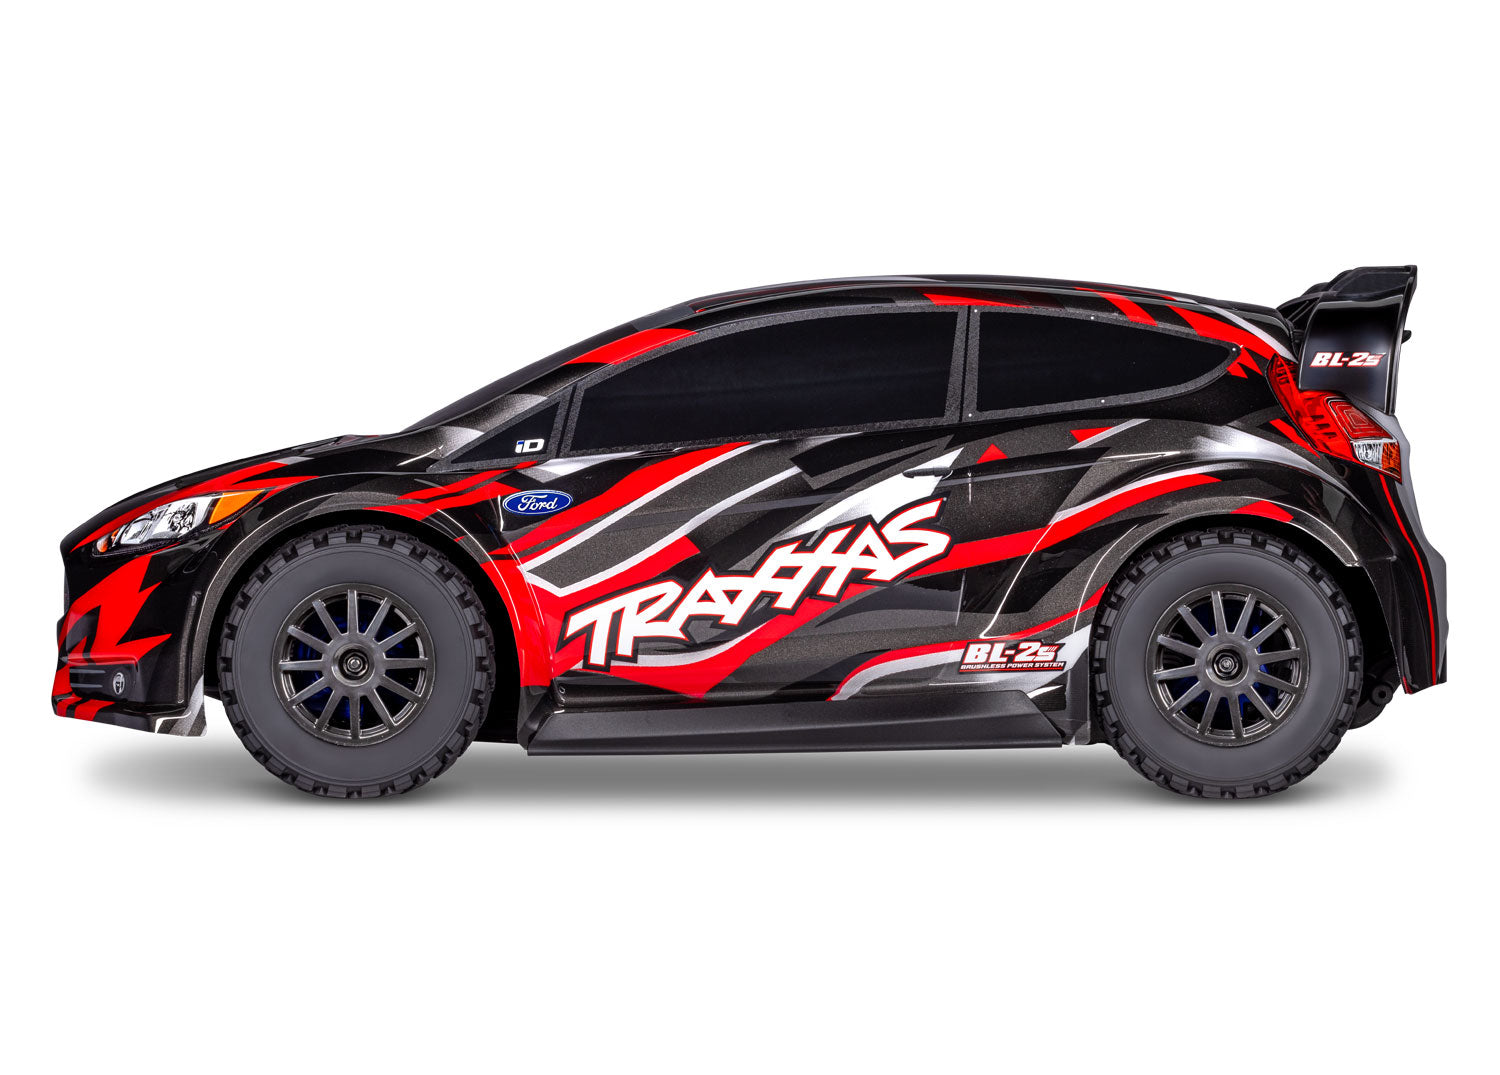 74154-4 Red Ford® Fiesta® ST Rally Brushless: 1/10 Scale Electric Rally Racer with TQ™ 2.4GHz Radio System